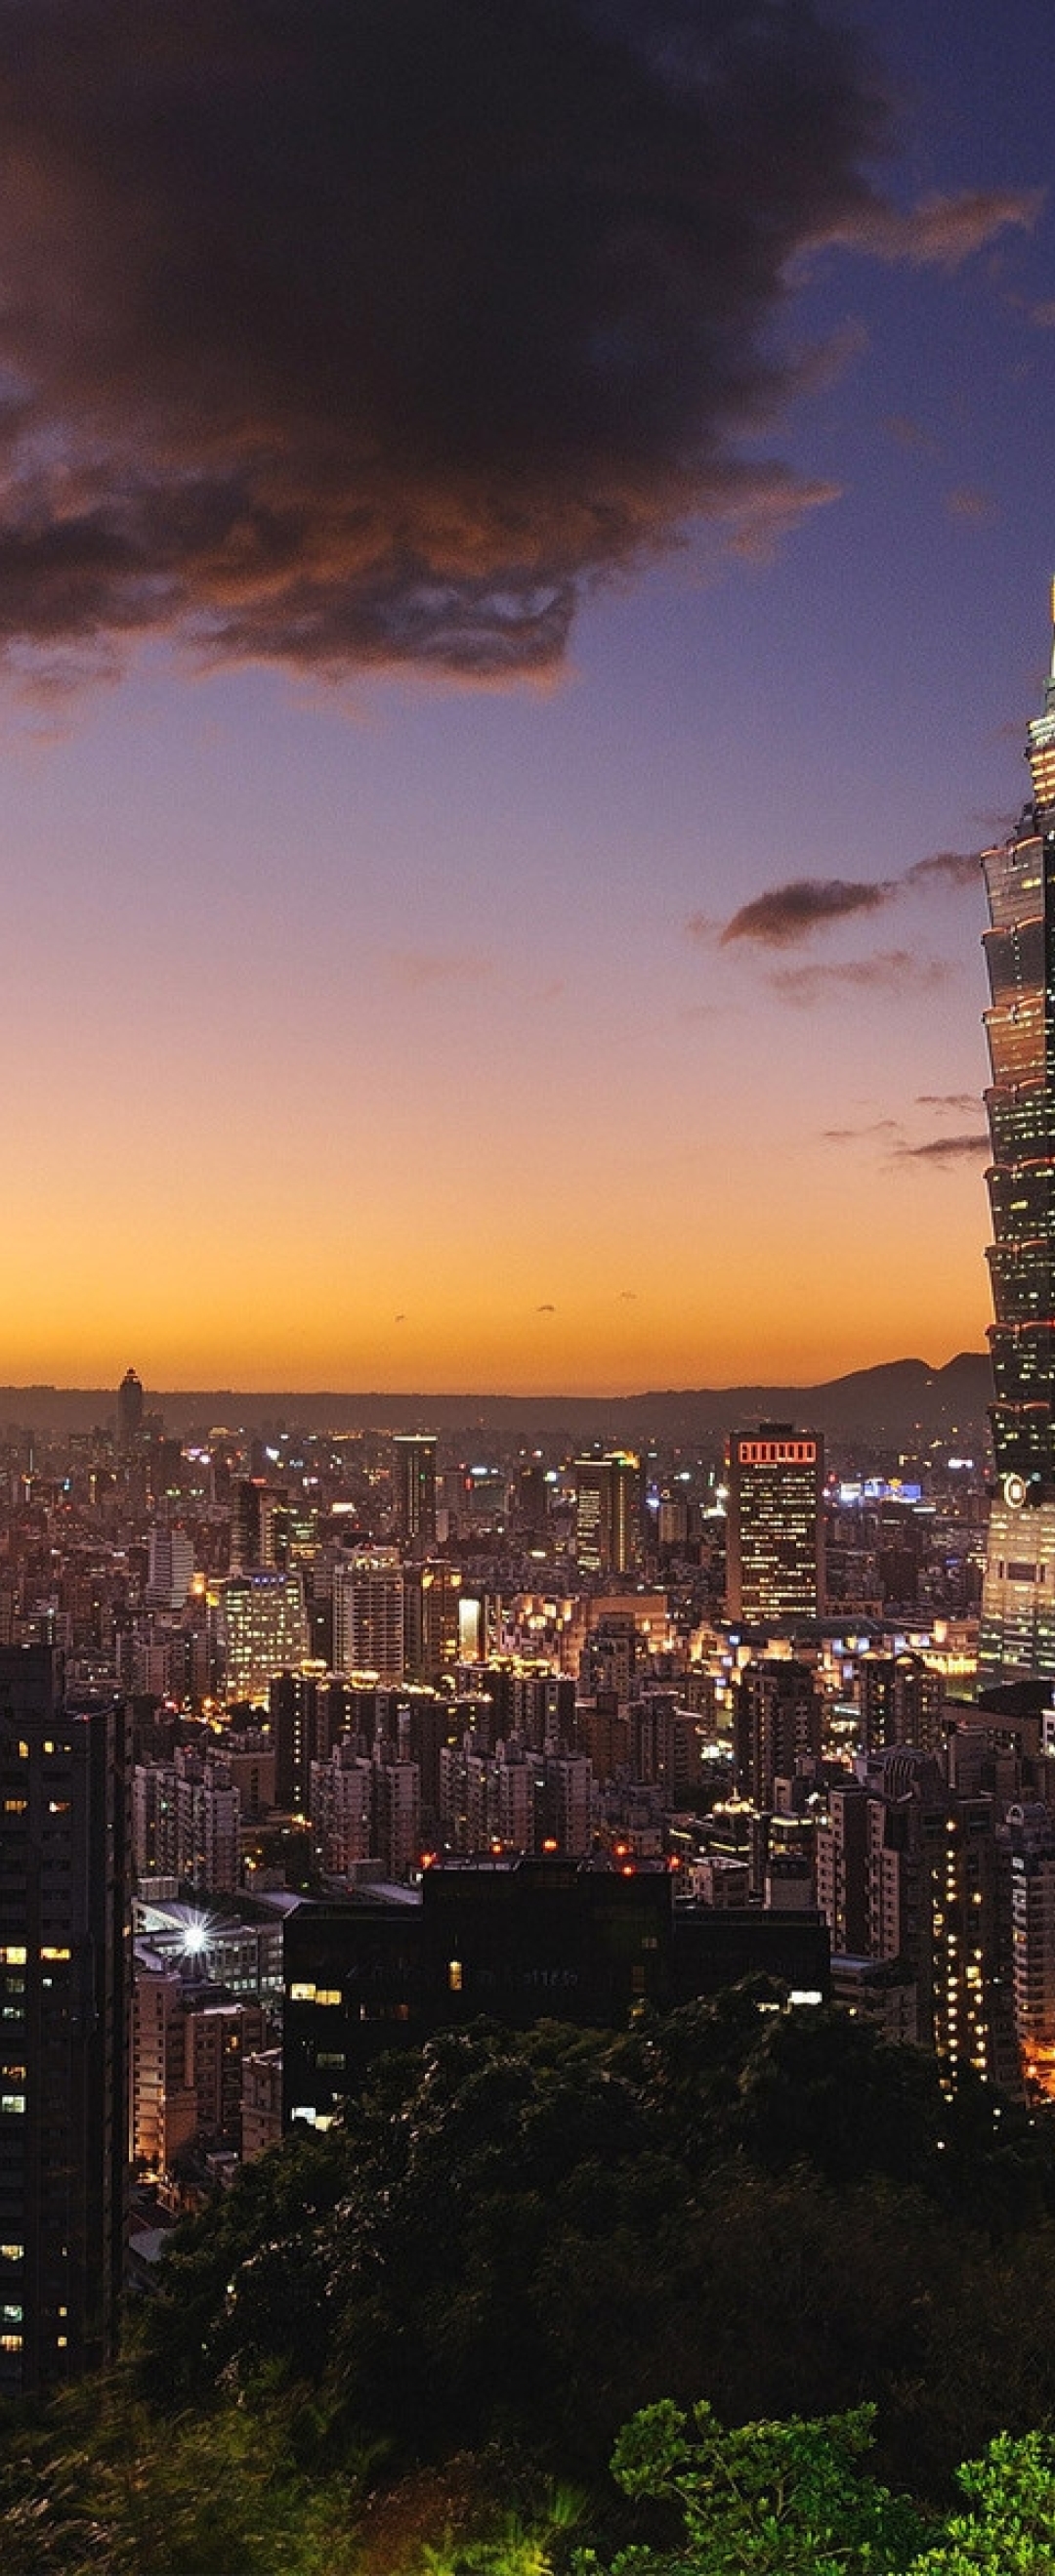 1080x2636 Taipei Taiwan Skyscrapers 1080x2636 Resolution Wallpaper Hd City 4k Wallpapers Images Photos And Background Wallpapers Den